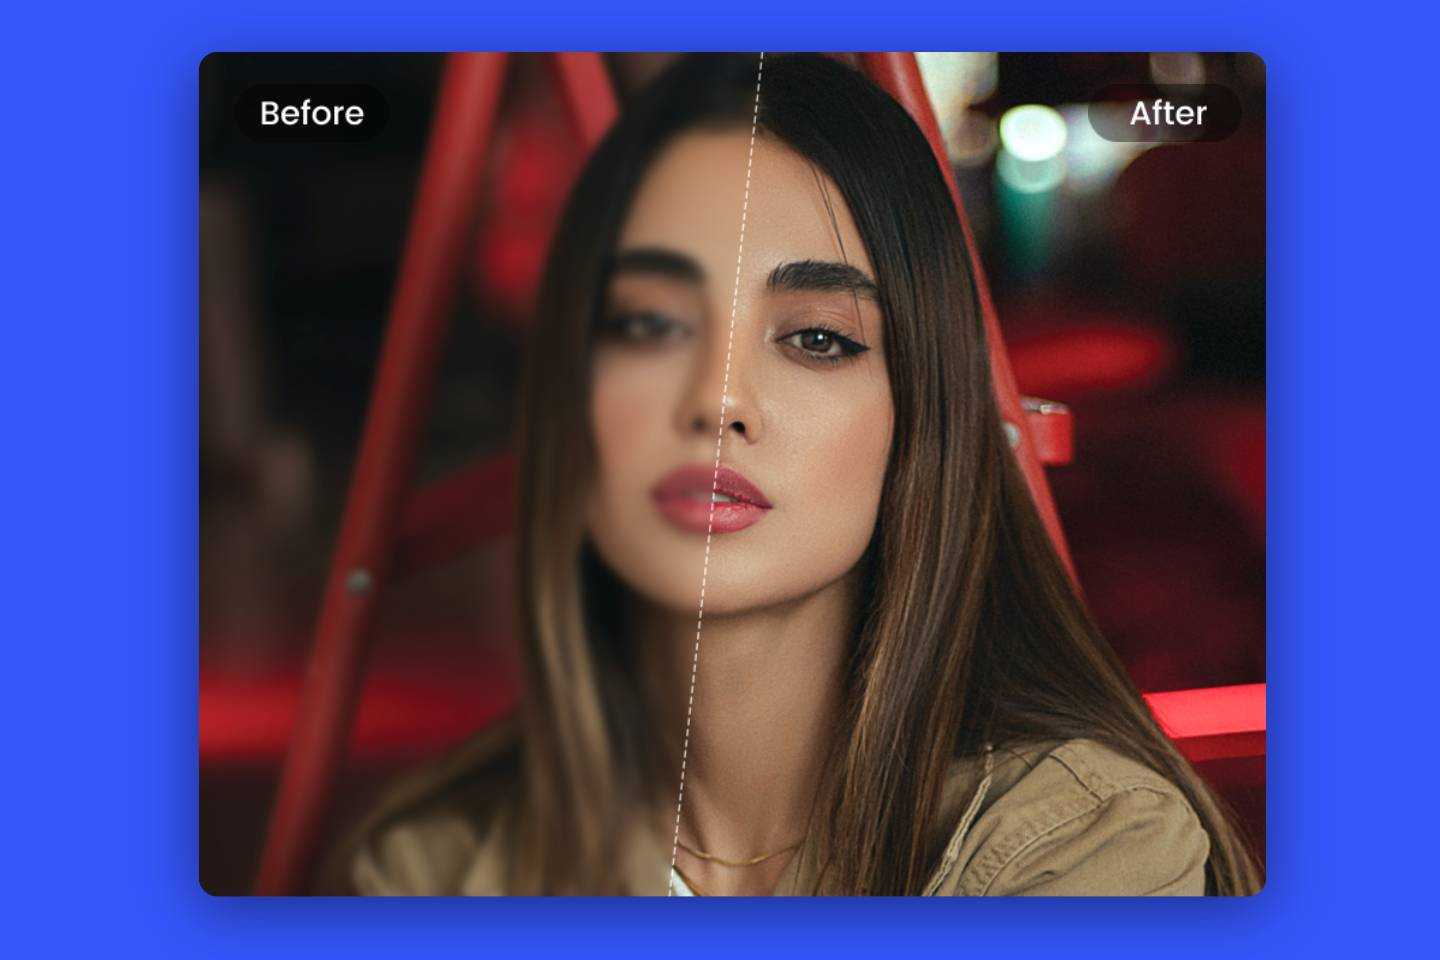 Unblur image online automatically with Fotor AI photo blur remover